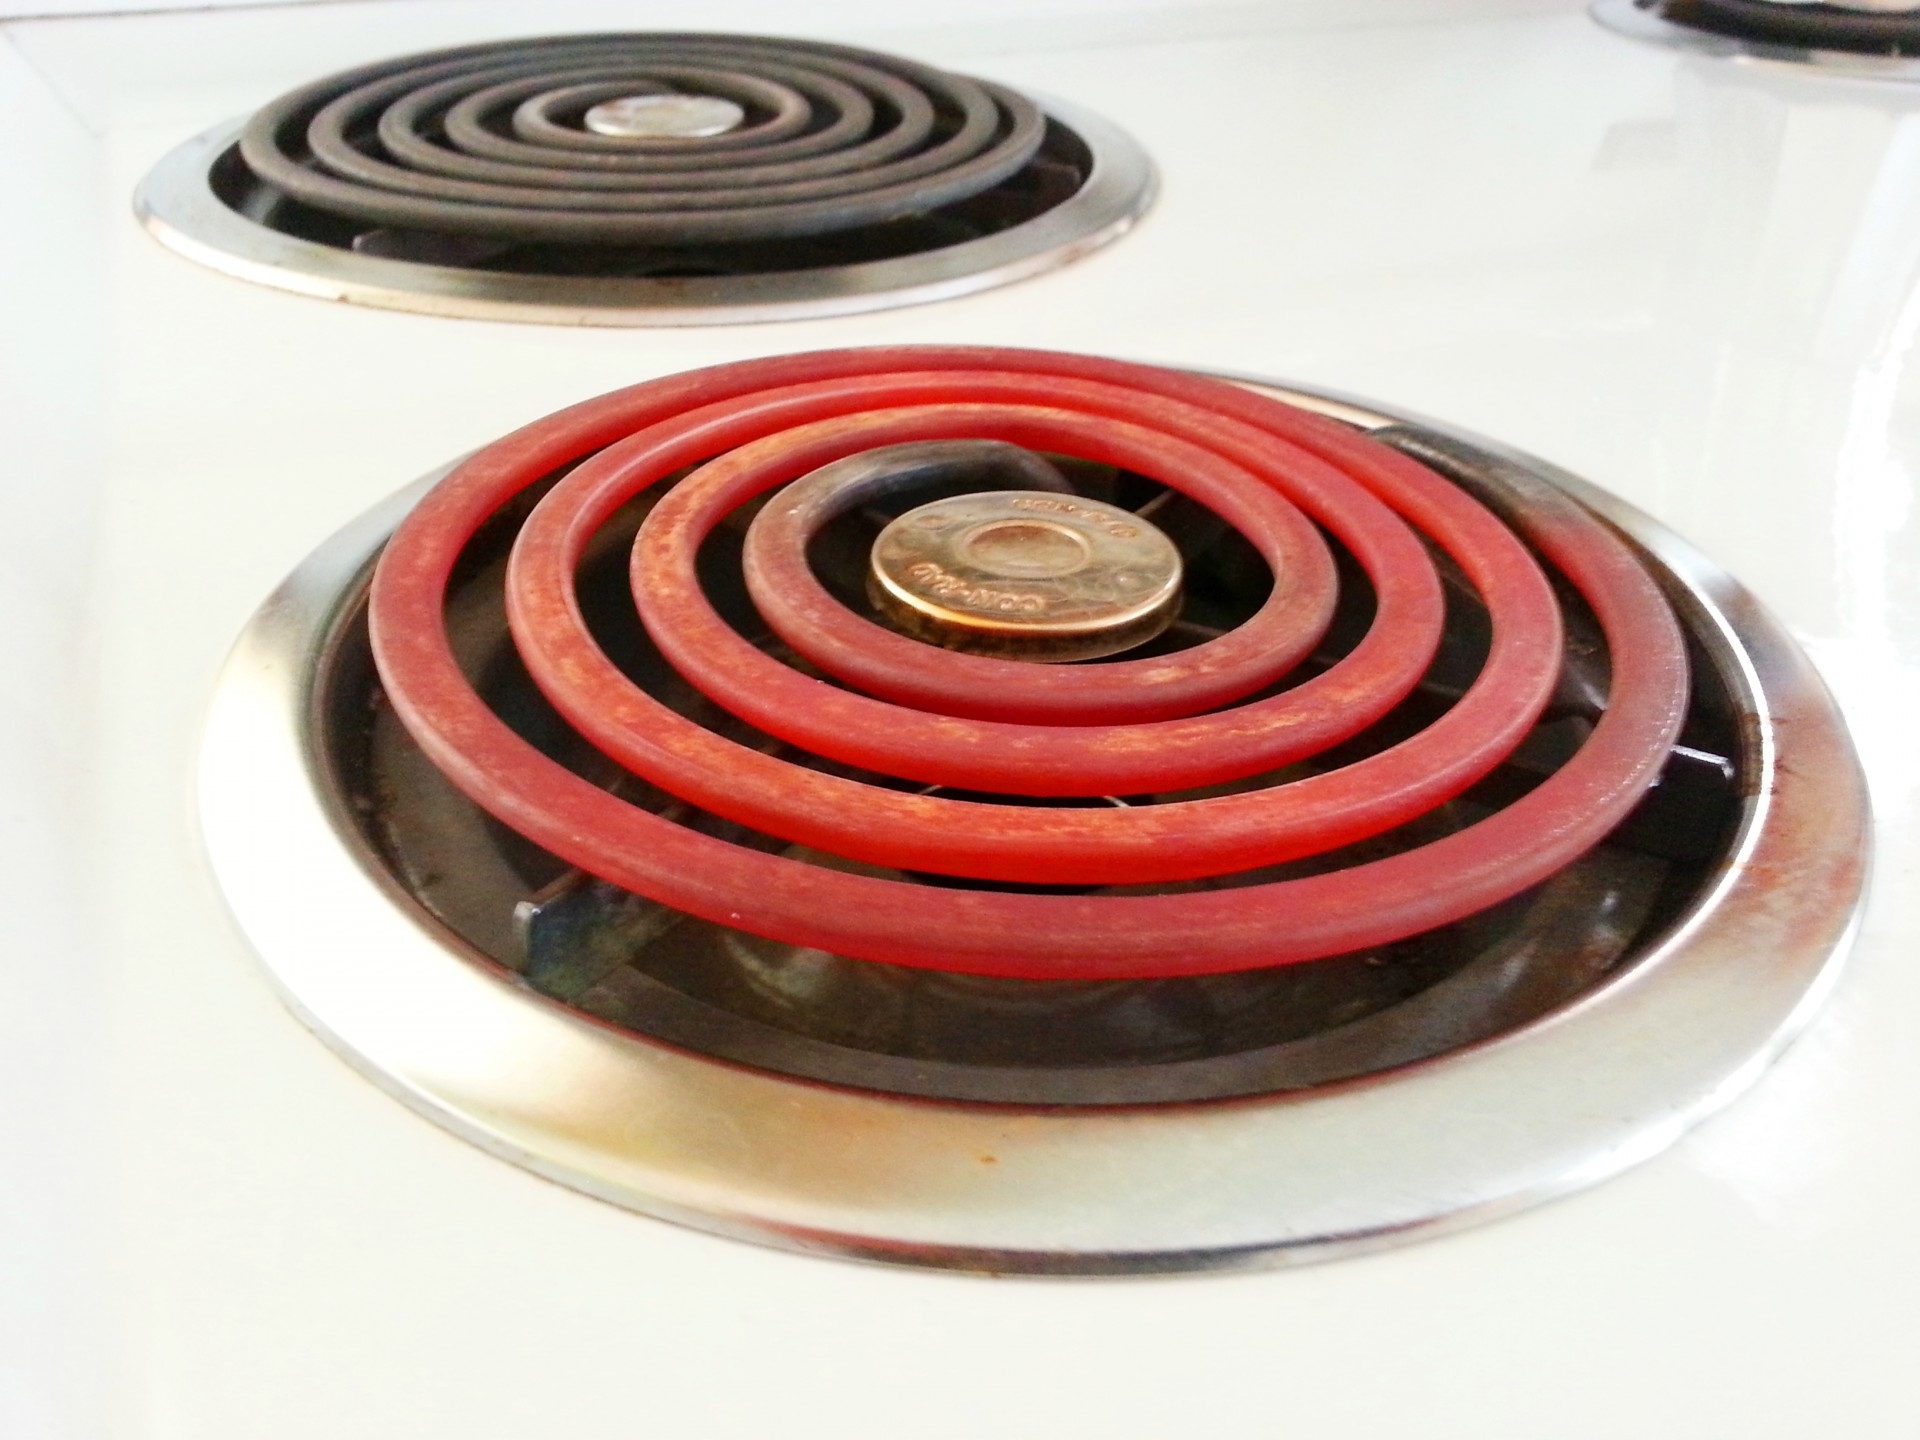 An electric coil cooktop stove with one burner on